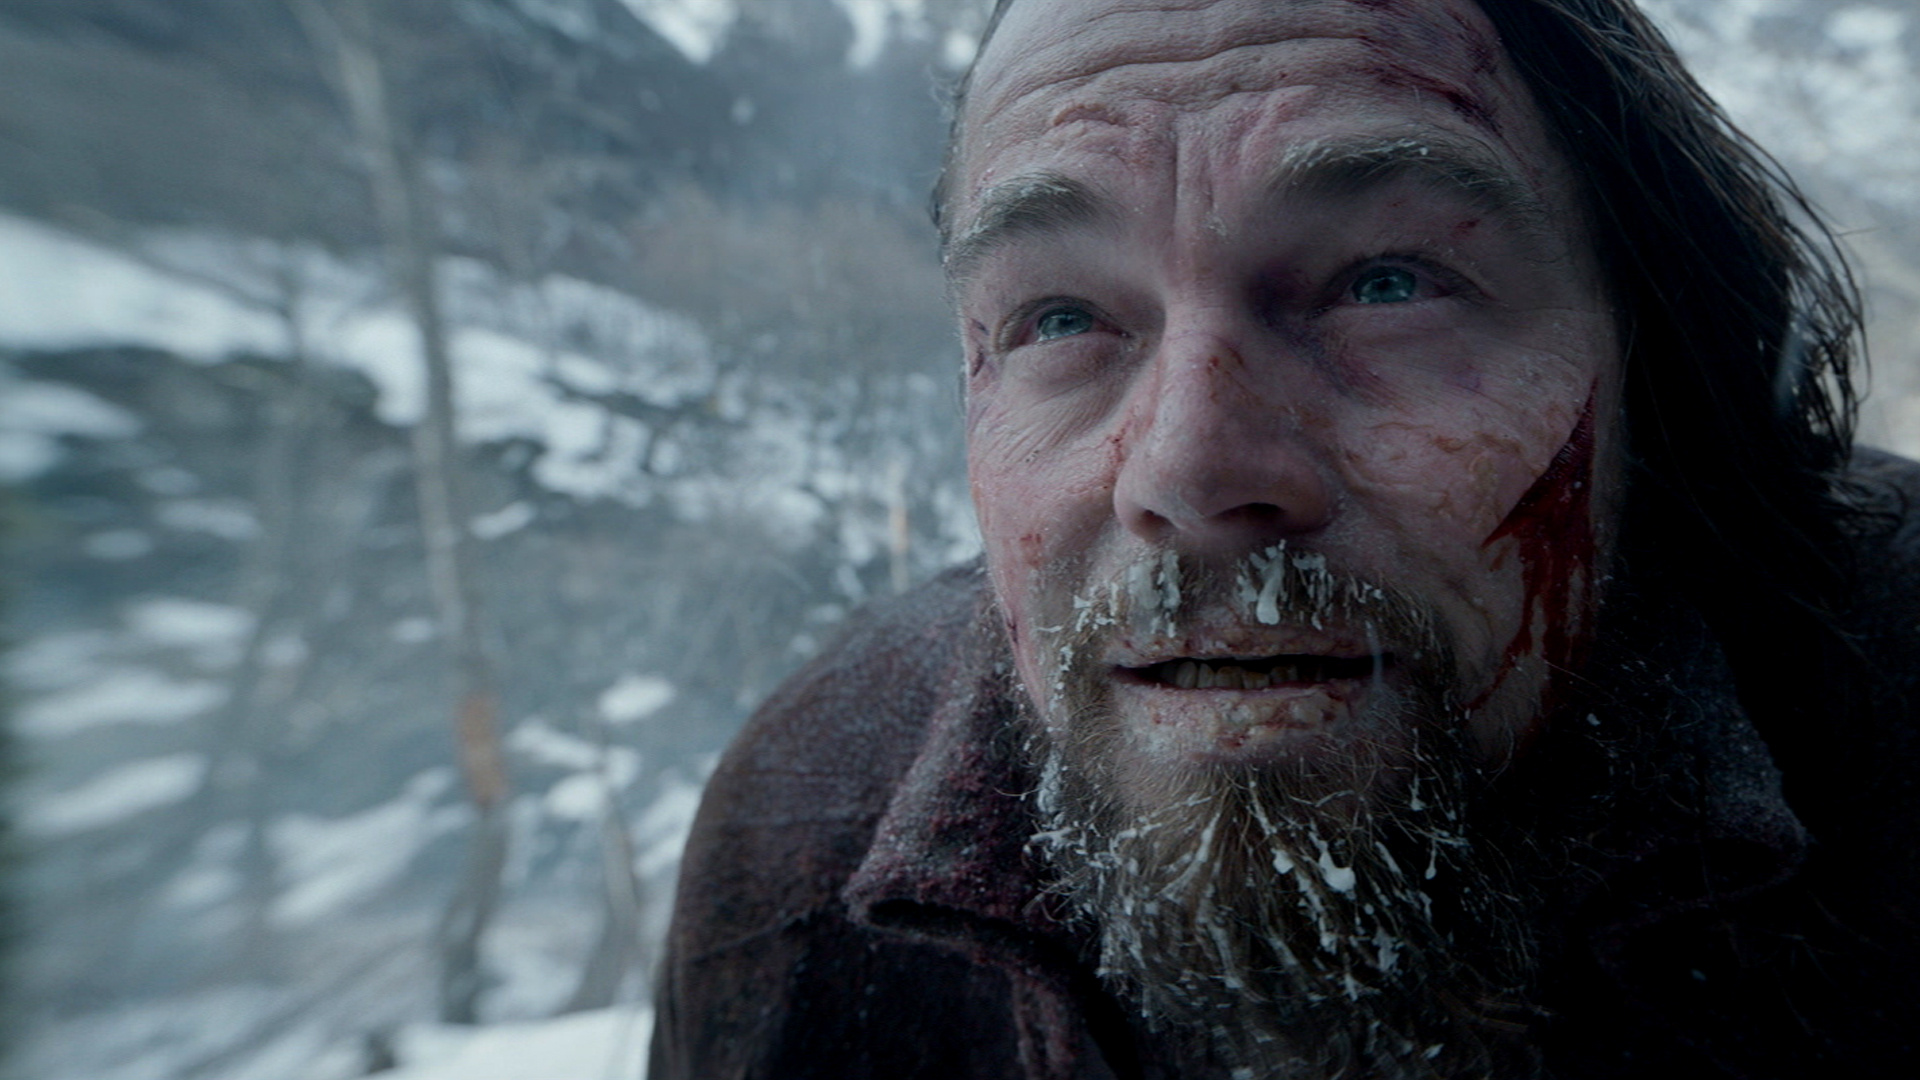 The Revenant wallpapers, Movie collection, Stunning pictures, High-quality images, 1920x1080 Full HD Desktop